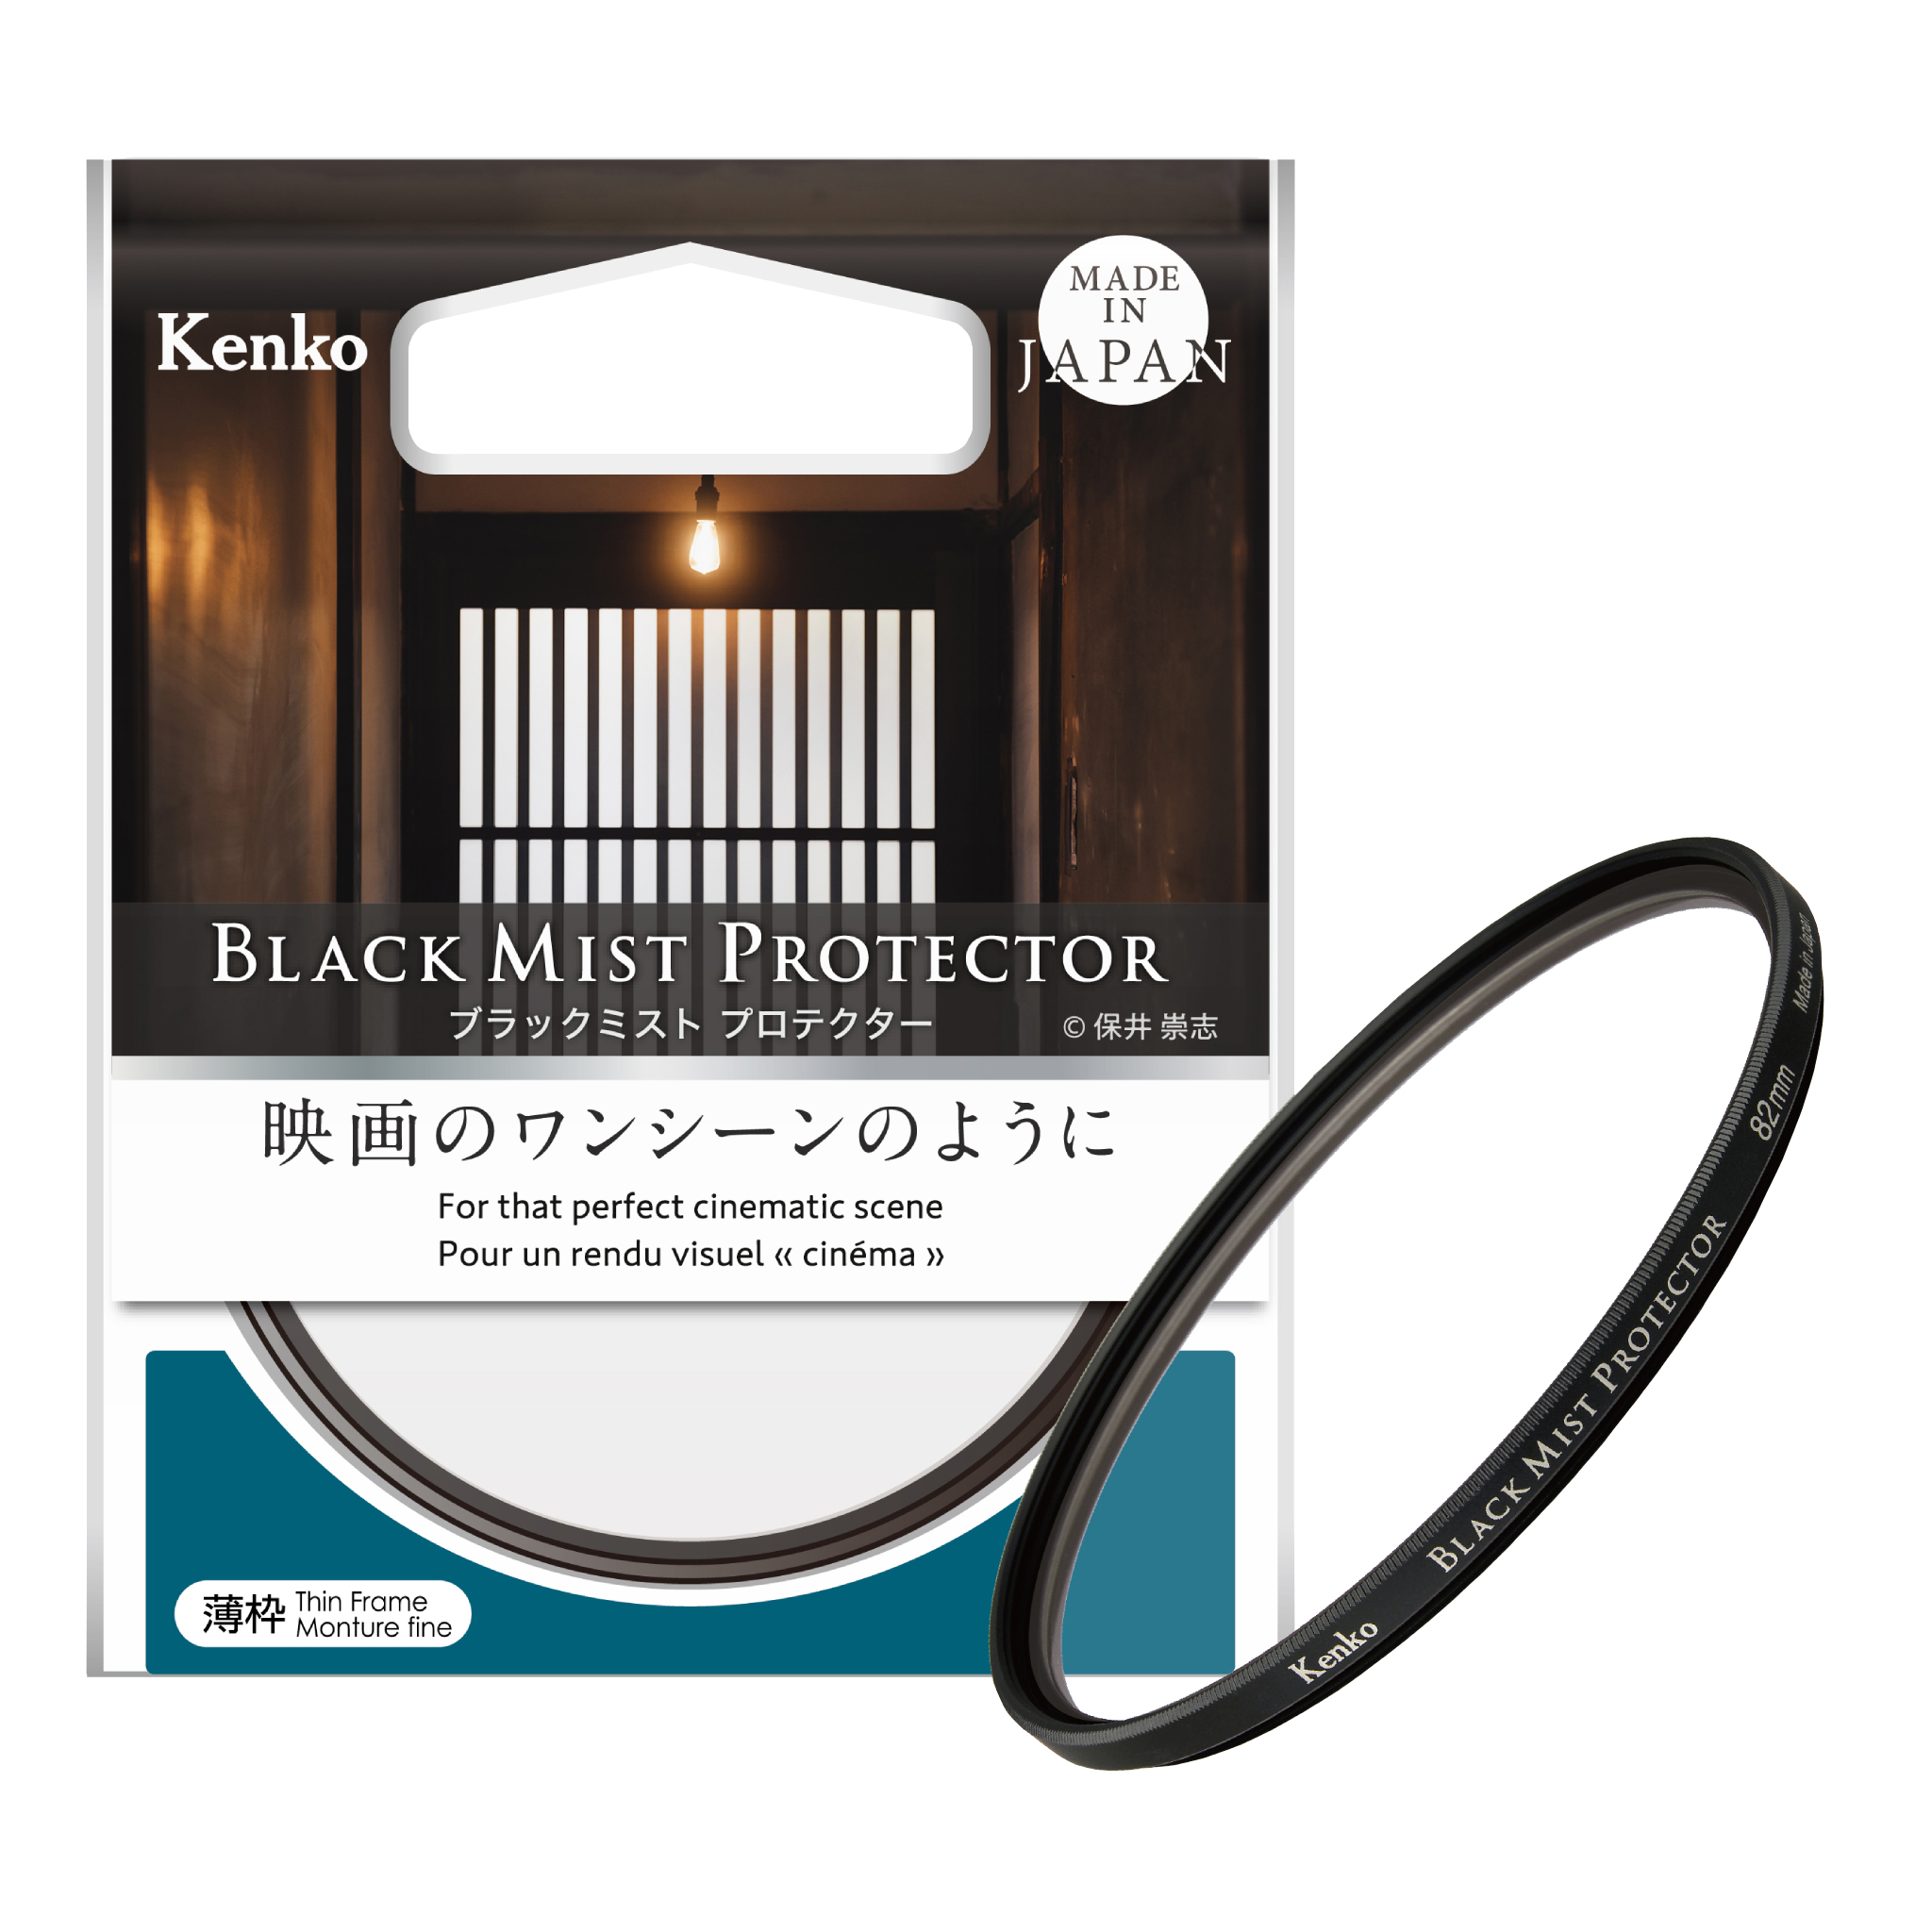 Kenko Black Mist PROTECTOR, Lens Protection & Diffusion Effect